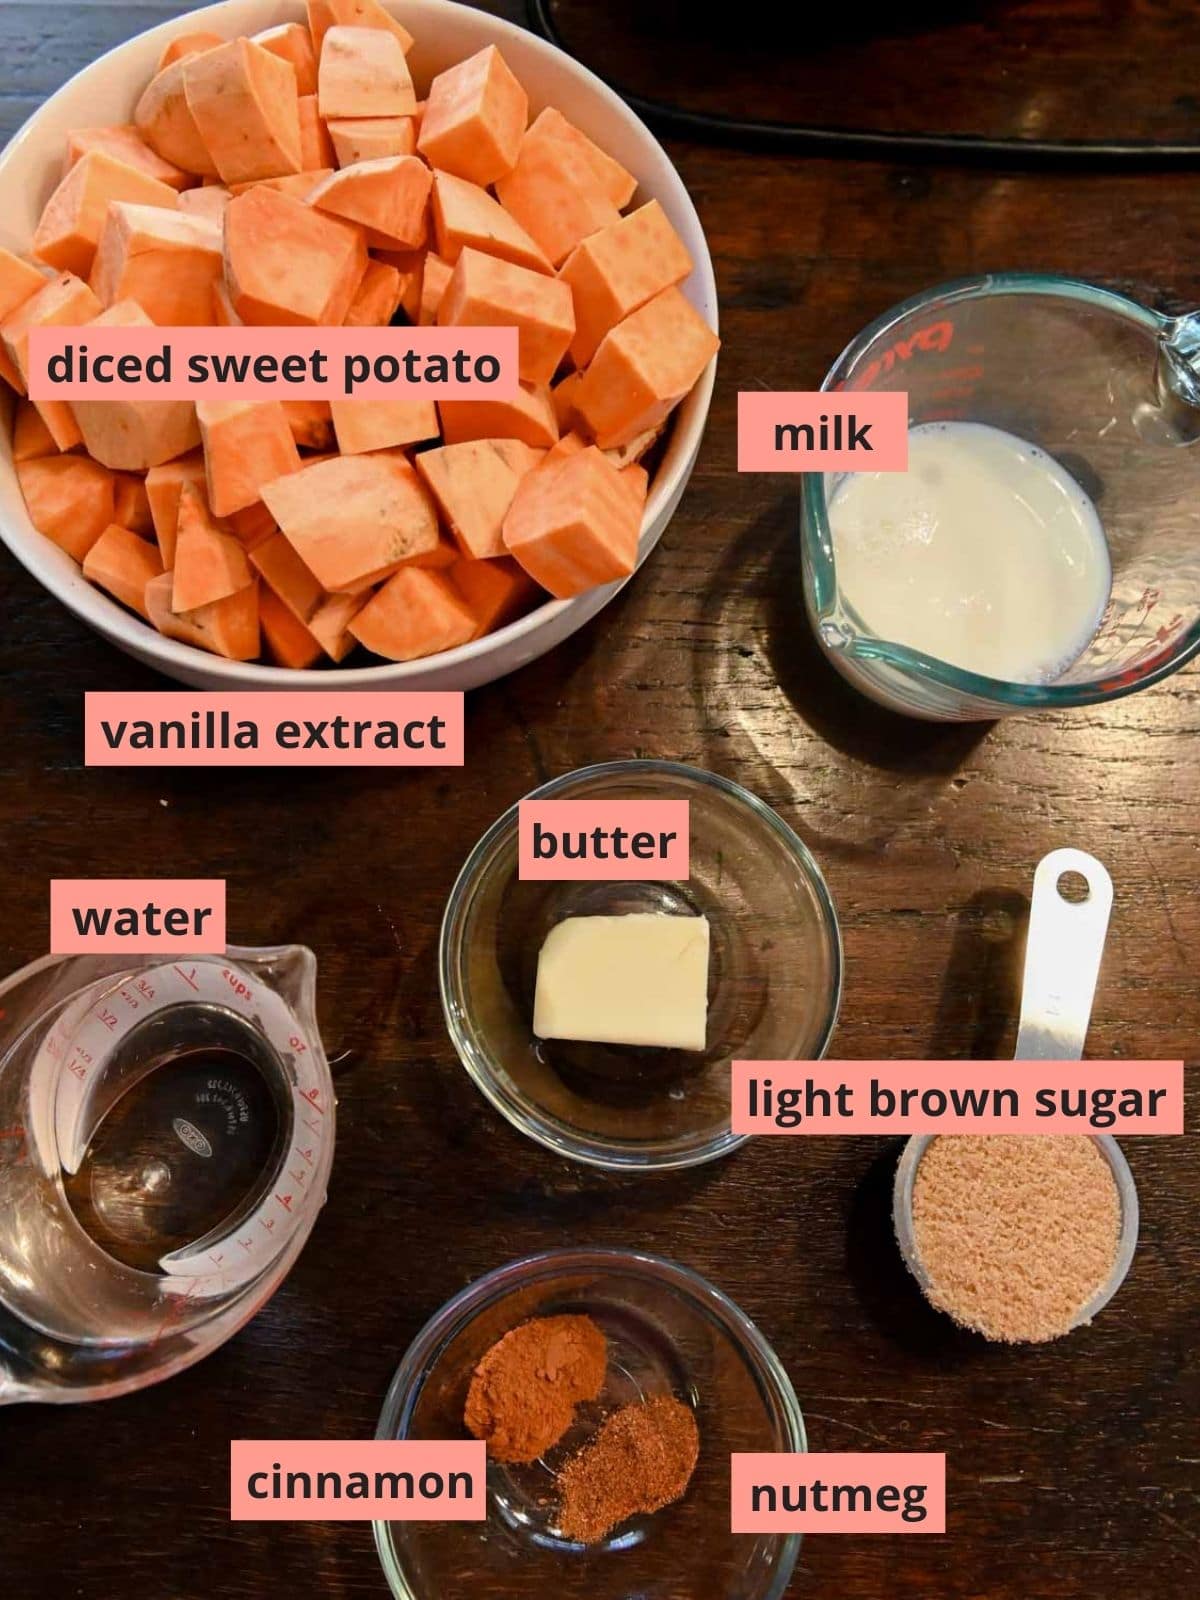 Labeled ingredients used to make mashed sweet potatoes.